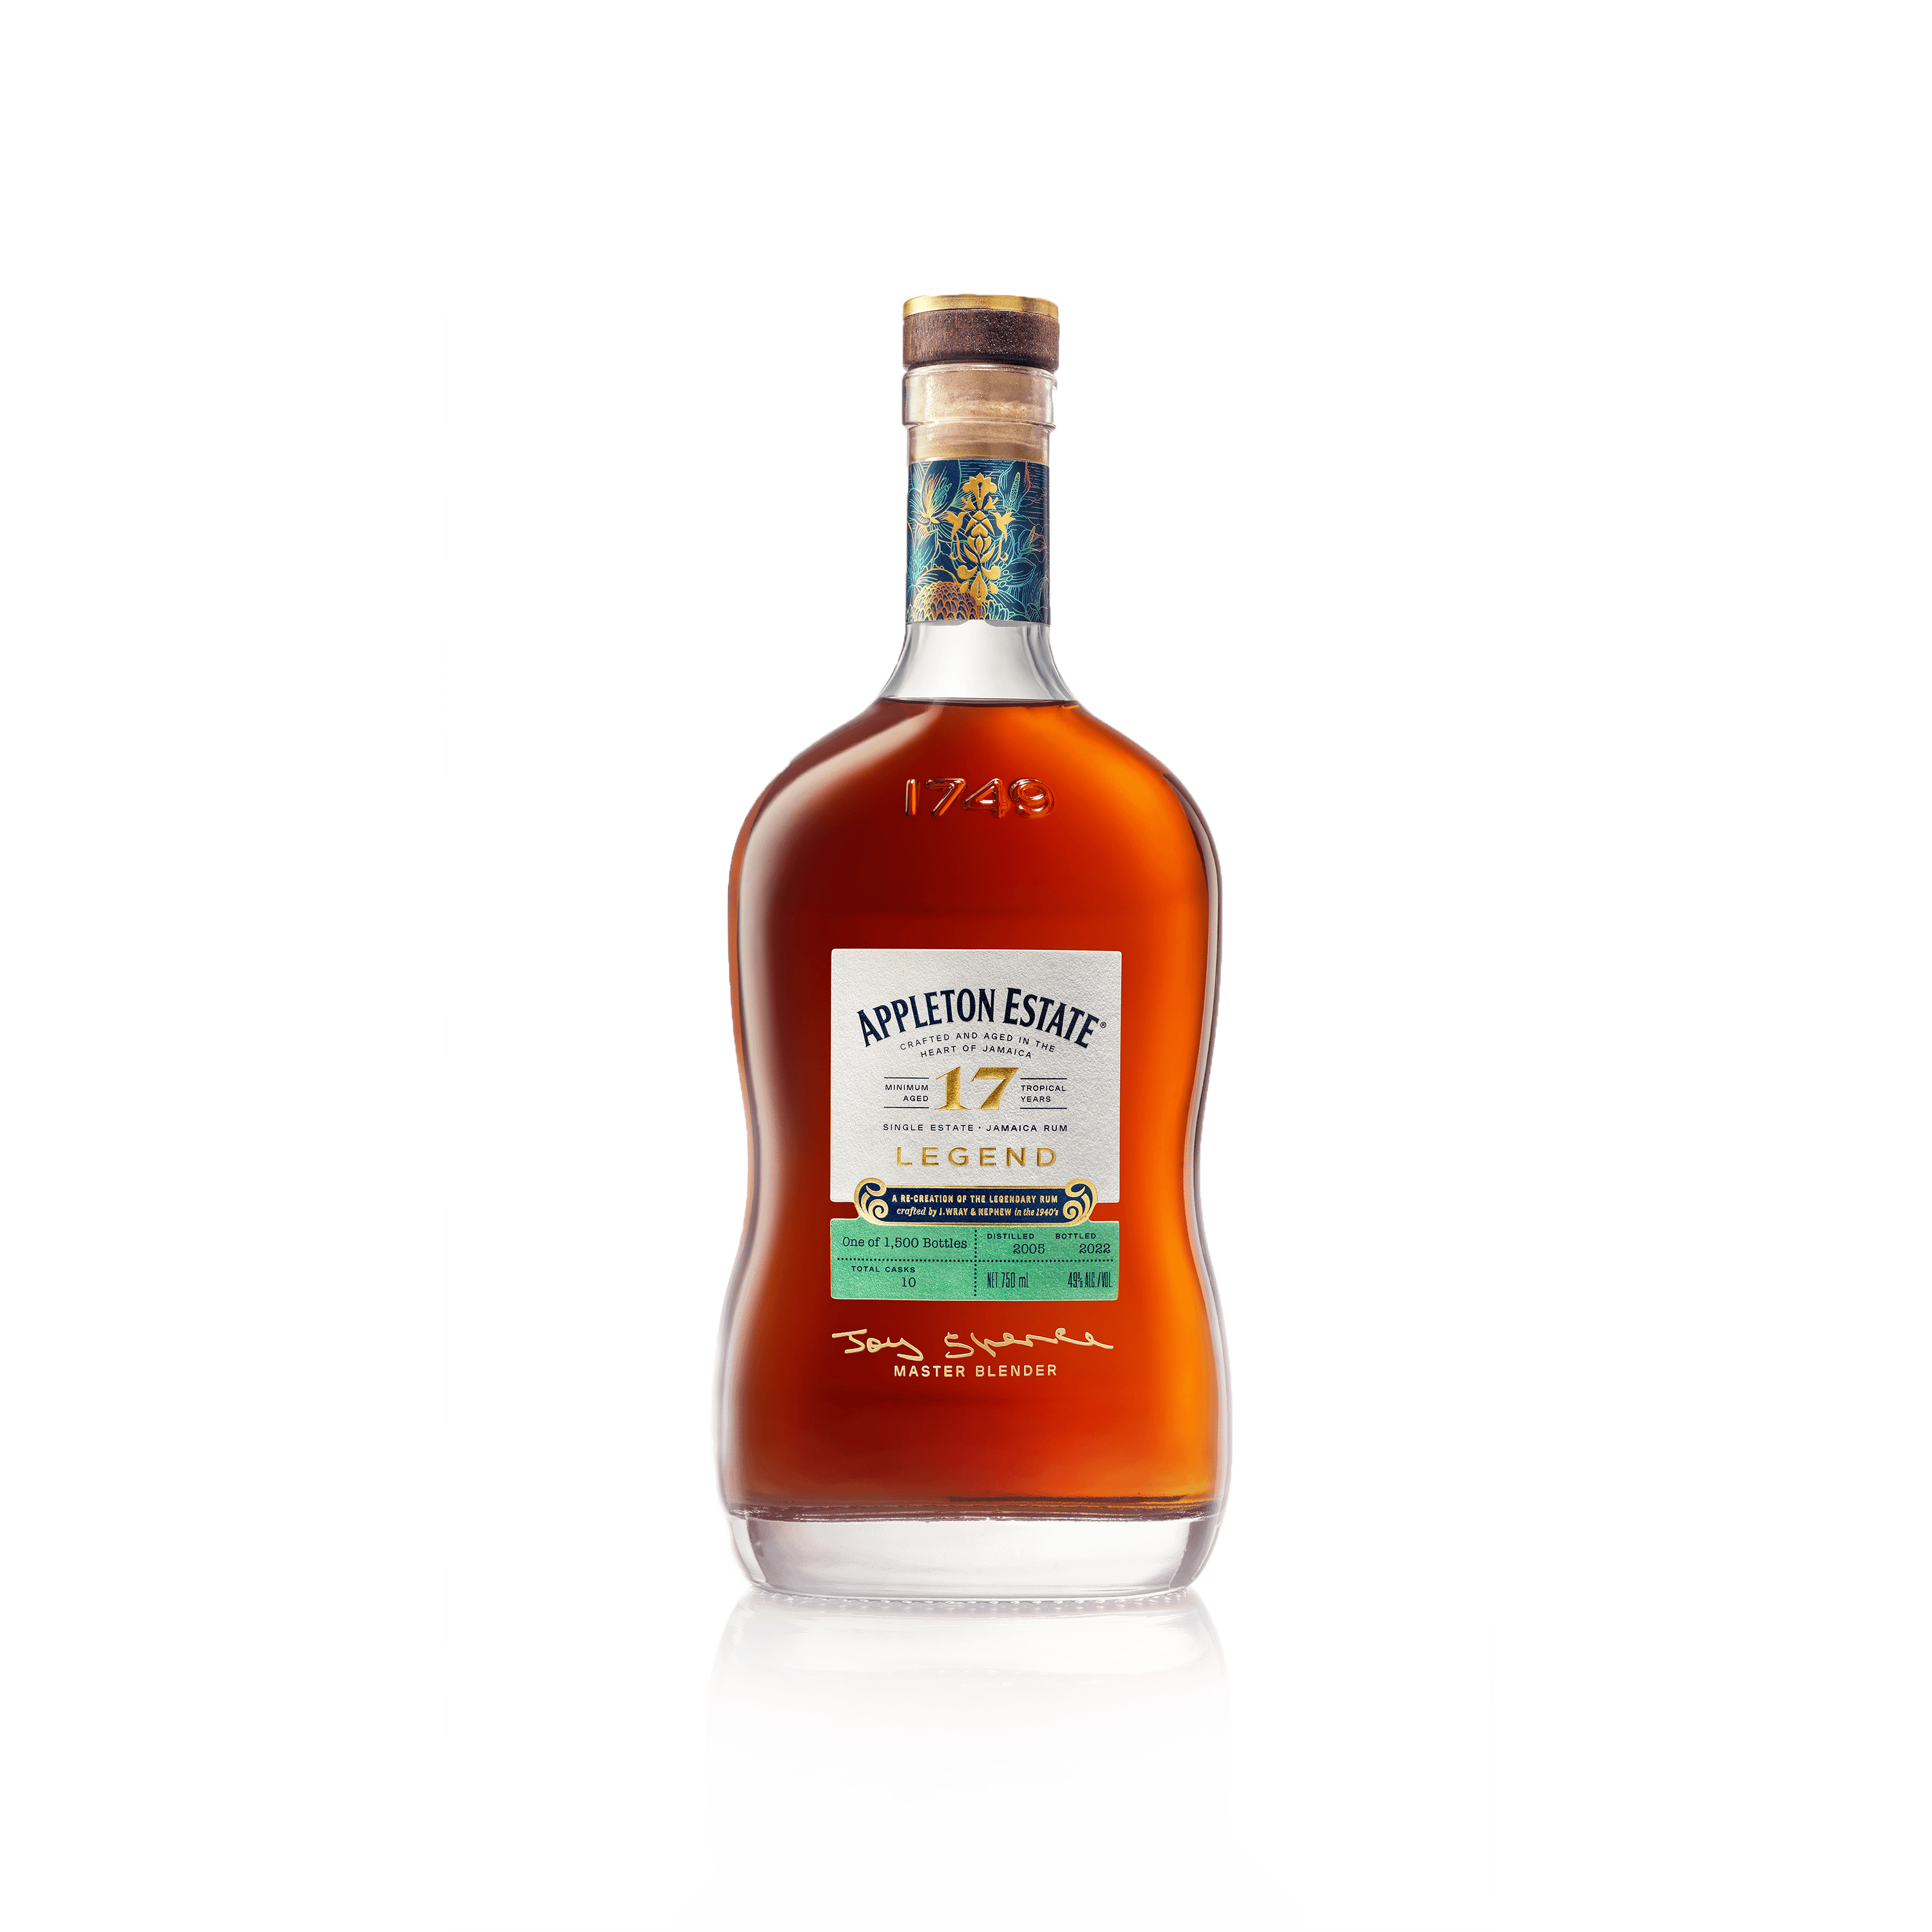 Limited Edition and Premium Rums | Appleton Estate